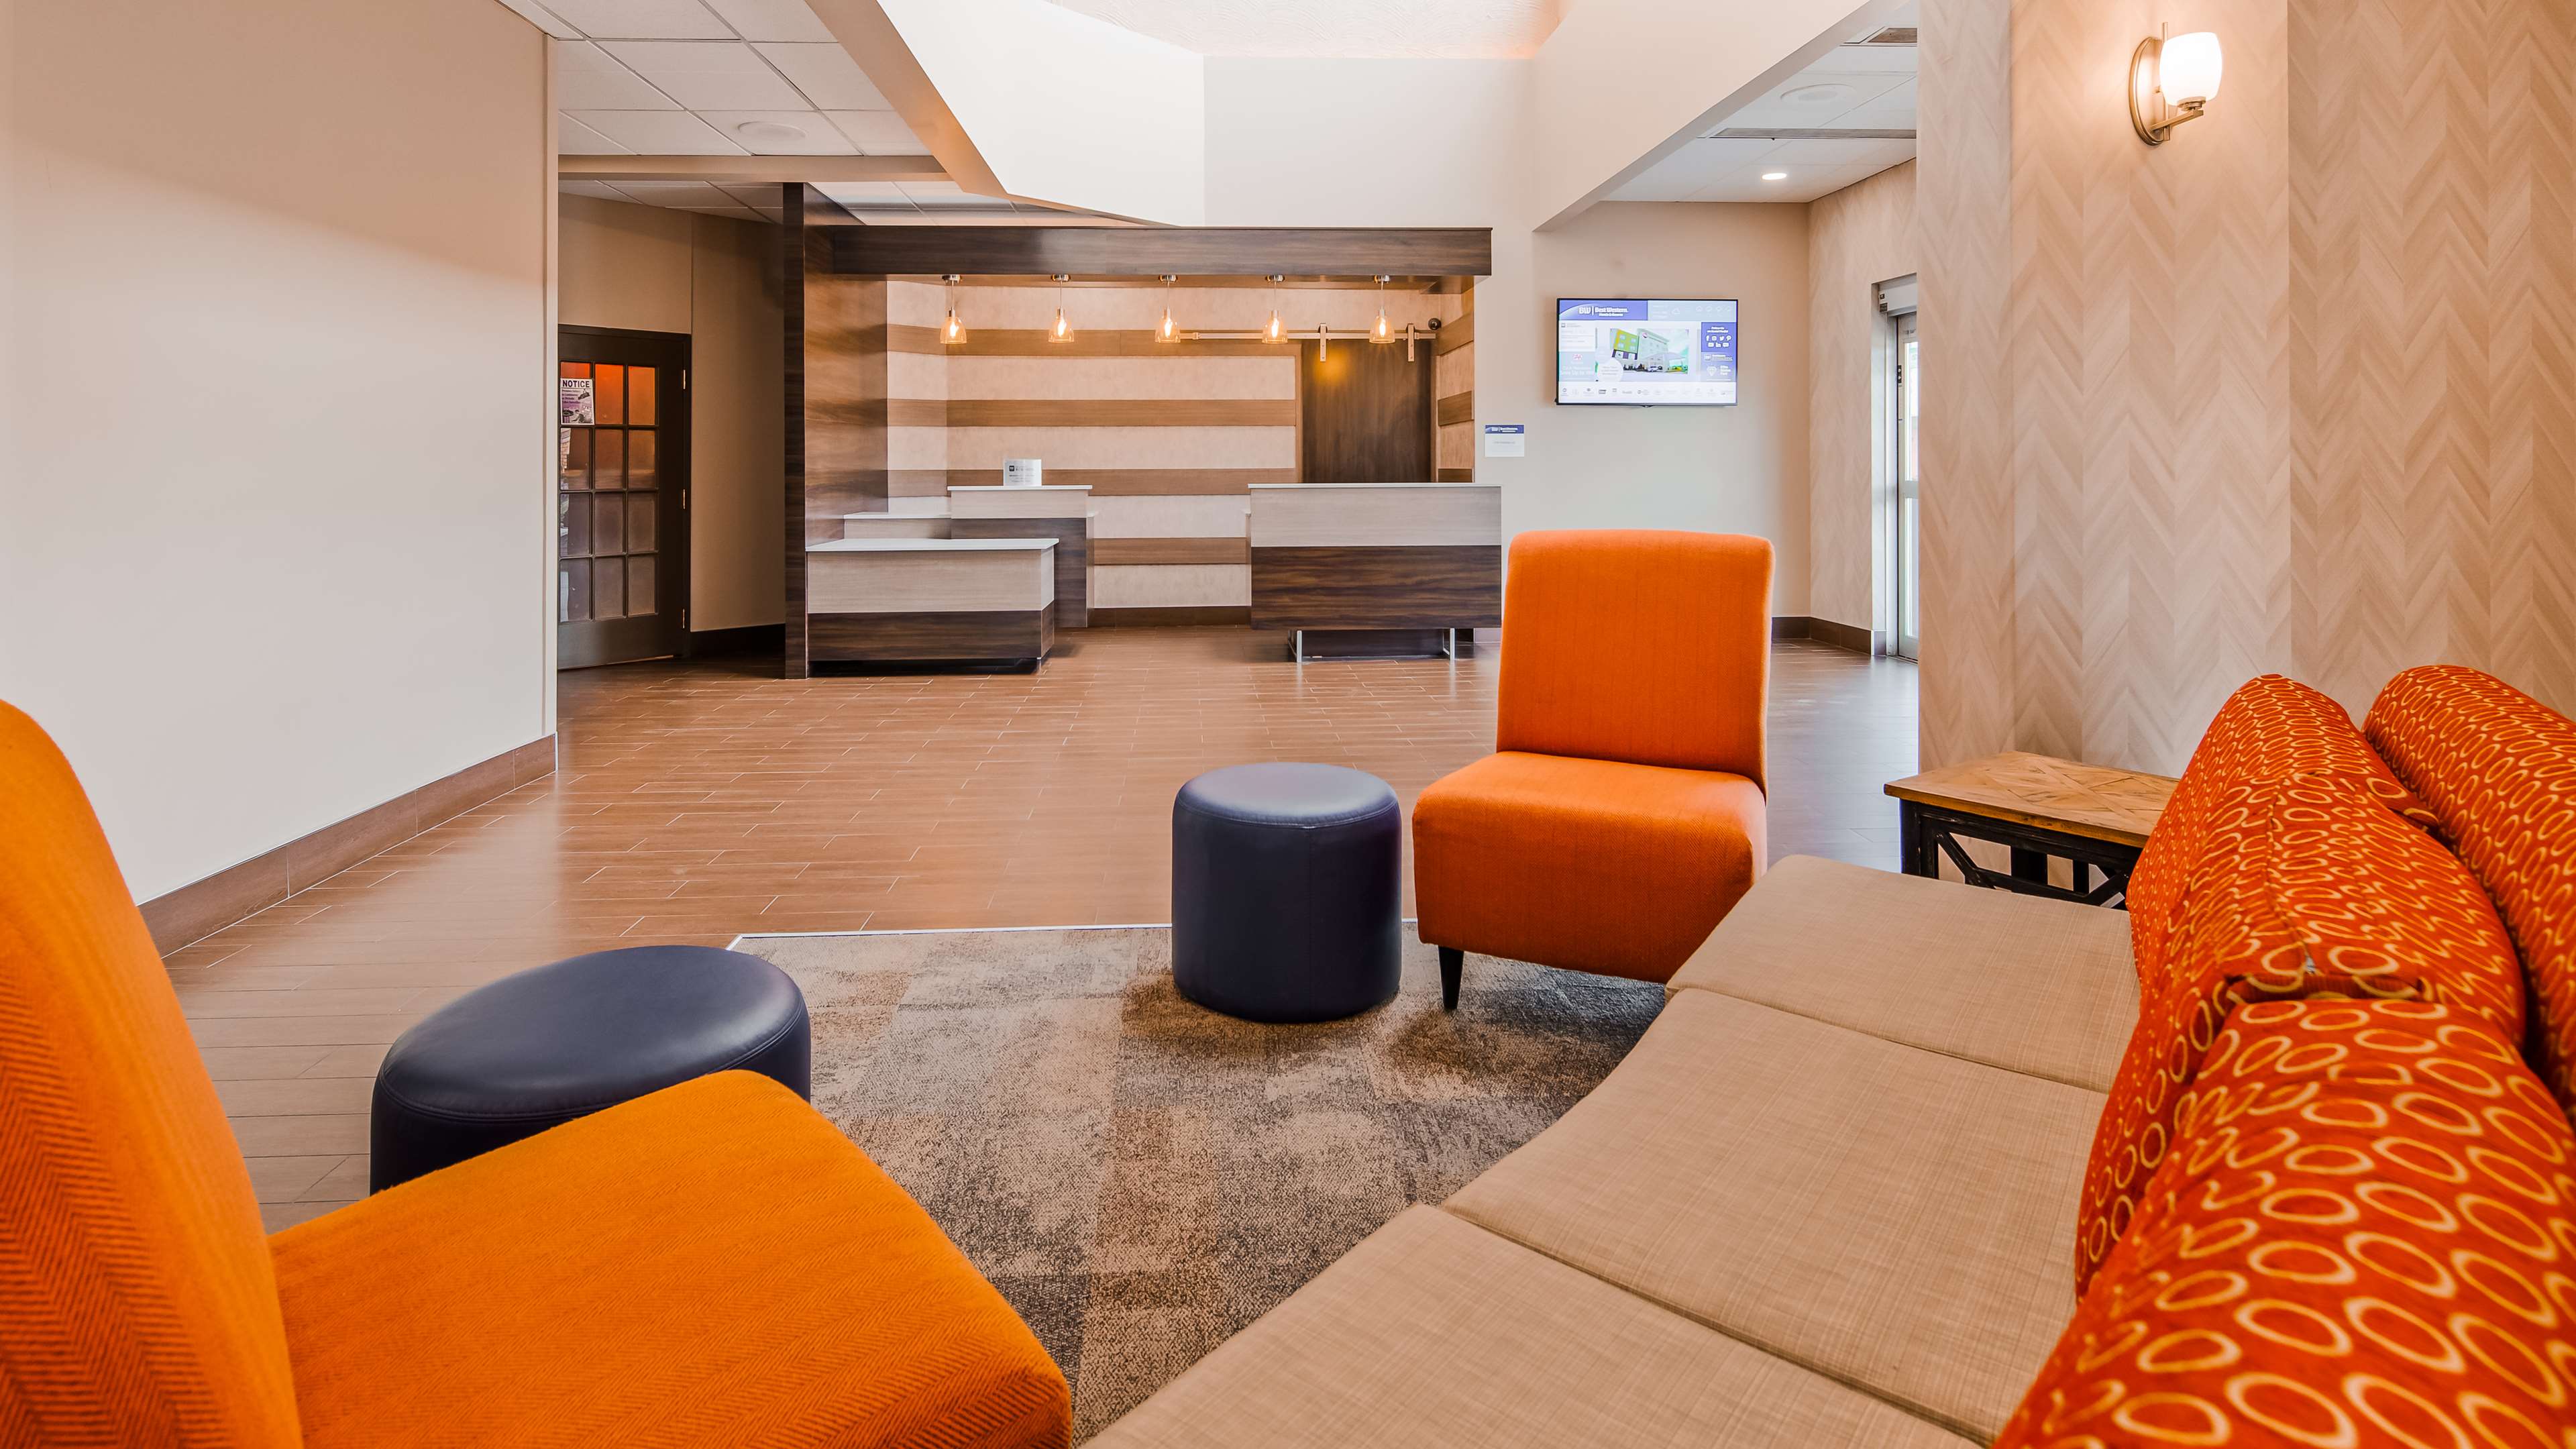 Best Western Airdrie in Airdrie: Our spacious lobby hosts 24 hour coffee, tea & flavored water, with helpful staff 24 hours a day.